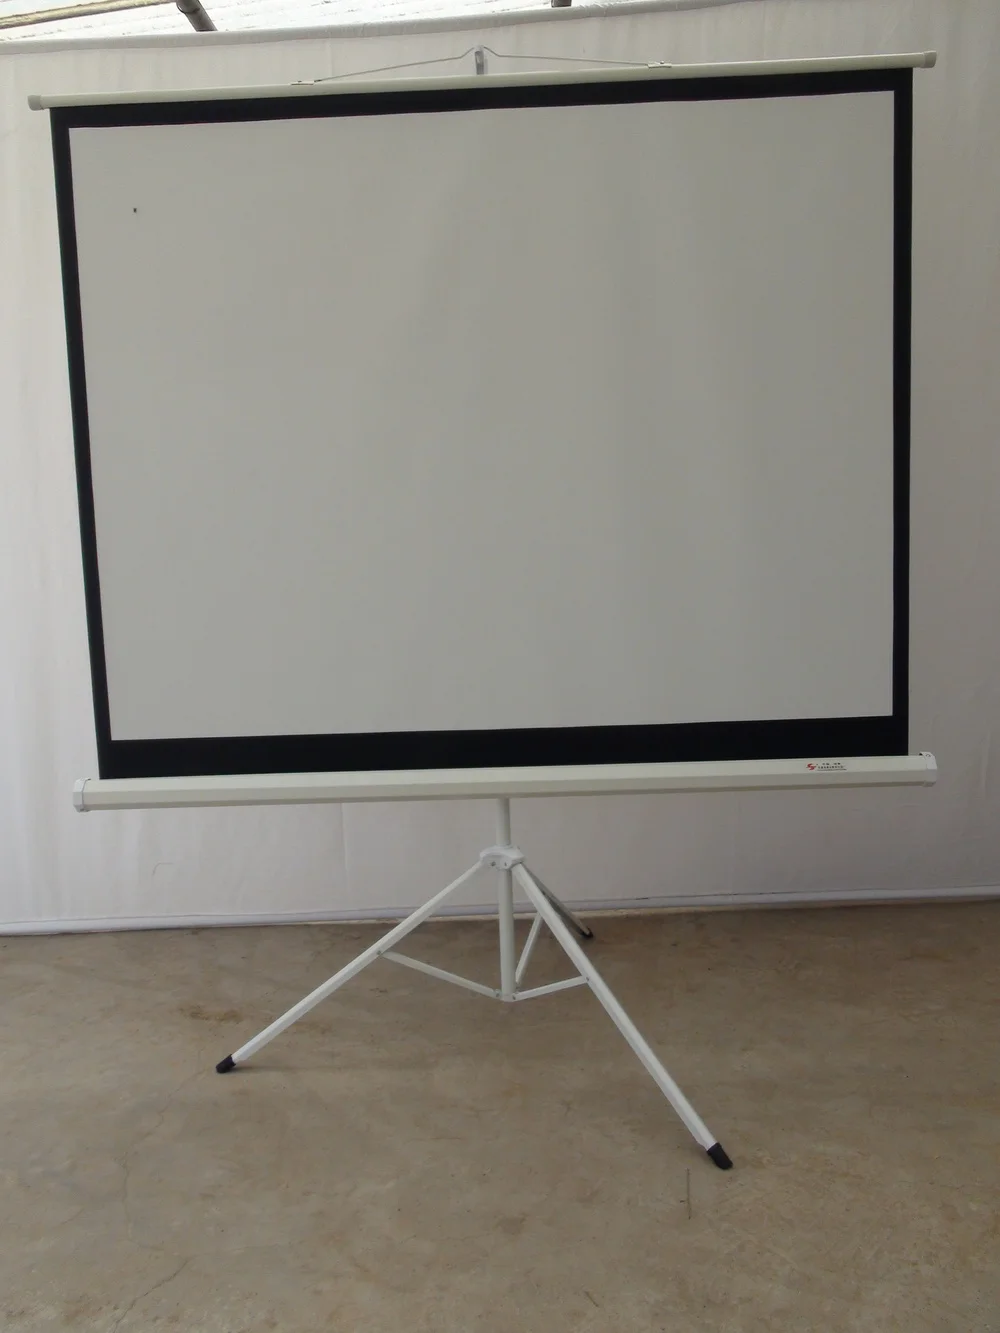 200 inch projector screen stand